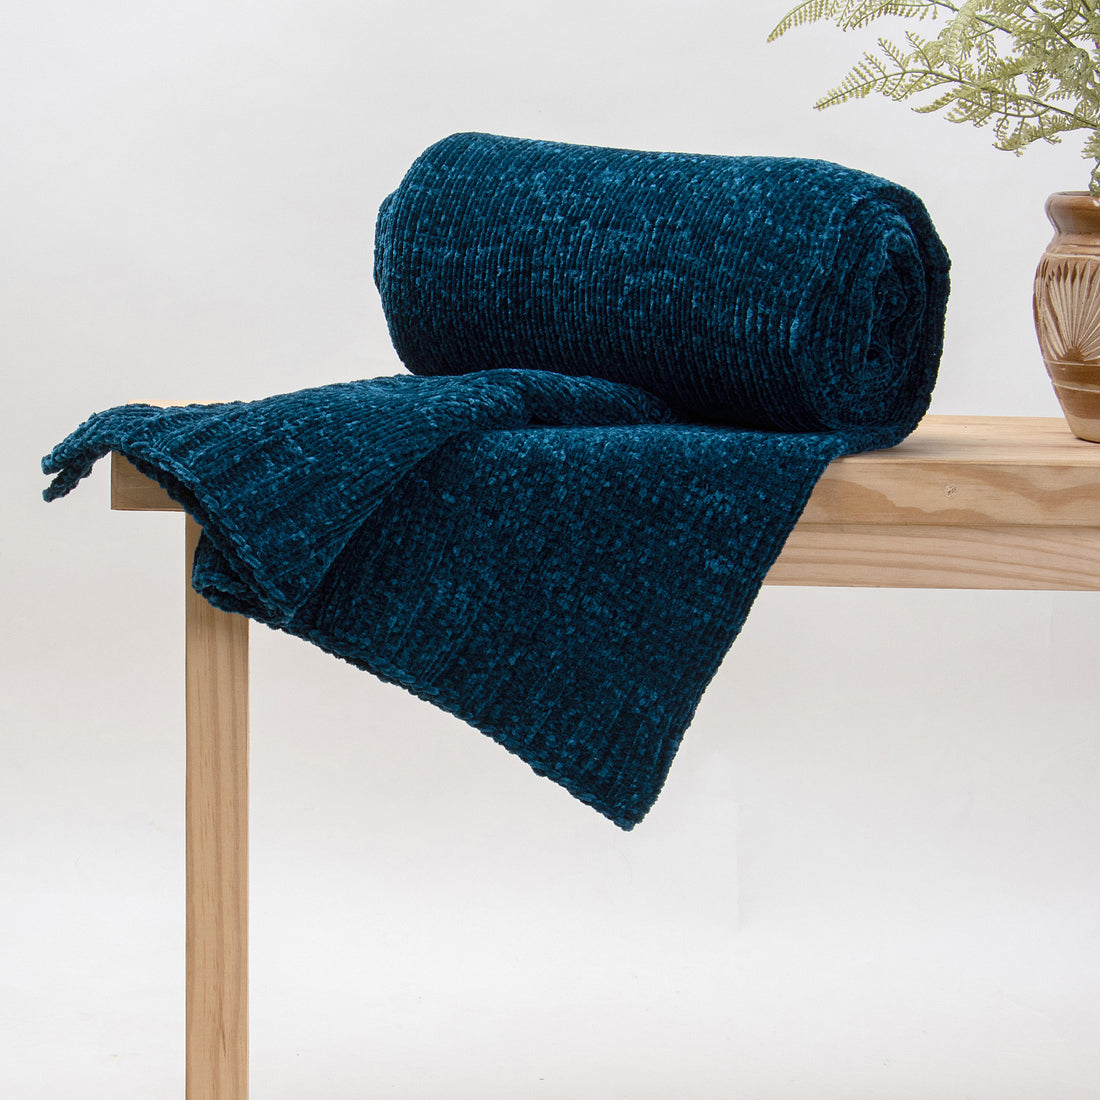 Blue Throw Blanket Hand-Knitted Soft Cotton For Decor Couch